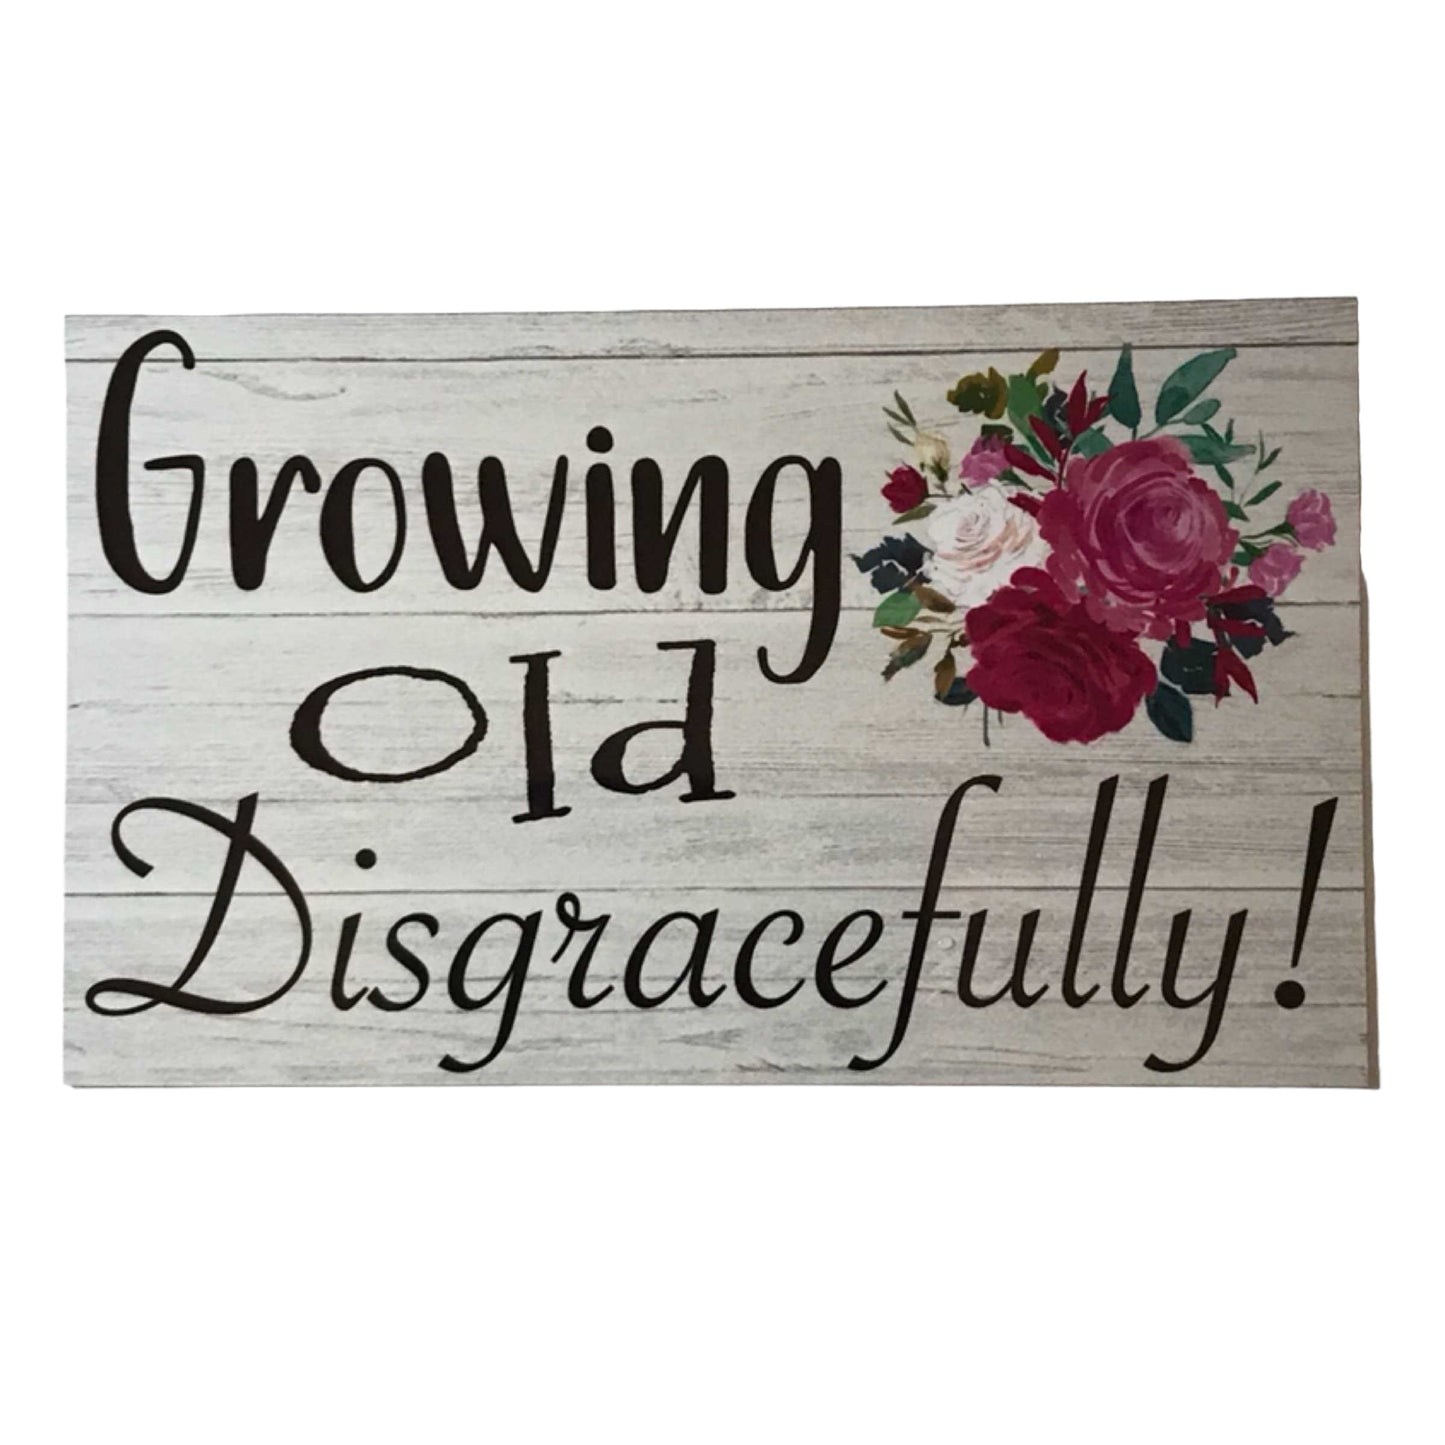 Growing Old Disgracefully Sign - The Renmy Store Homewares & Gifts 